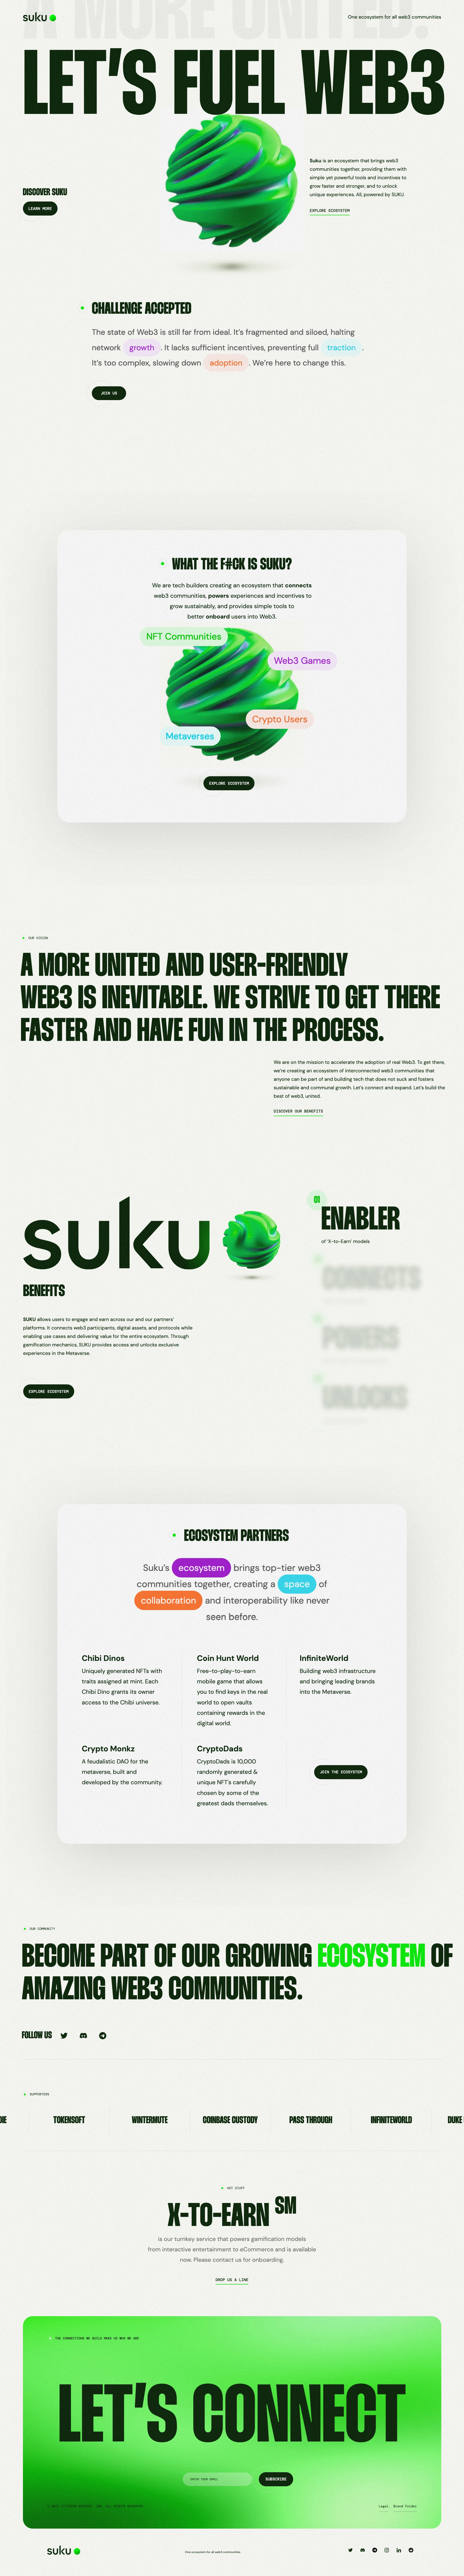 Suku Landing Page Example: Suku is an ecosystem that brings web3 communities together, providing them with simple yet powerful tools and incentives to grow faster and stronger, and to unlock unique experiences. All, powered by Suku.